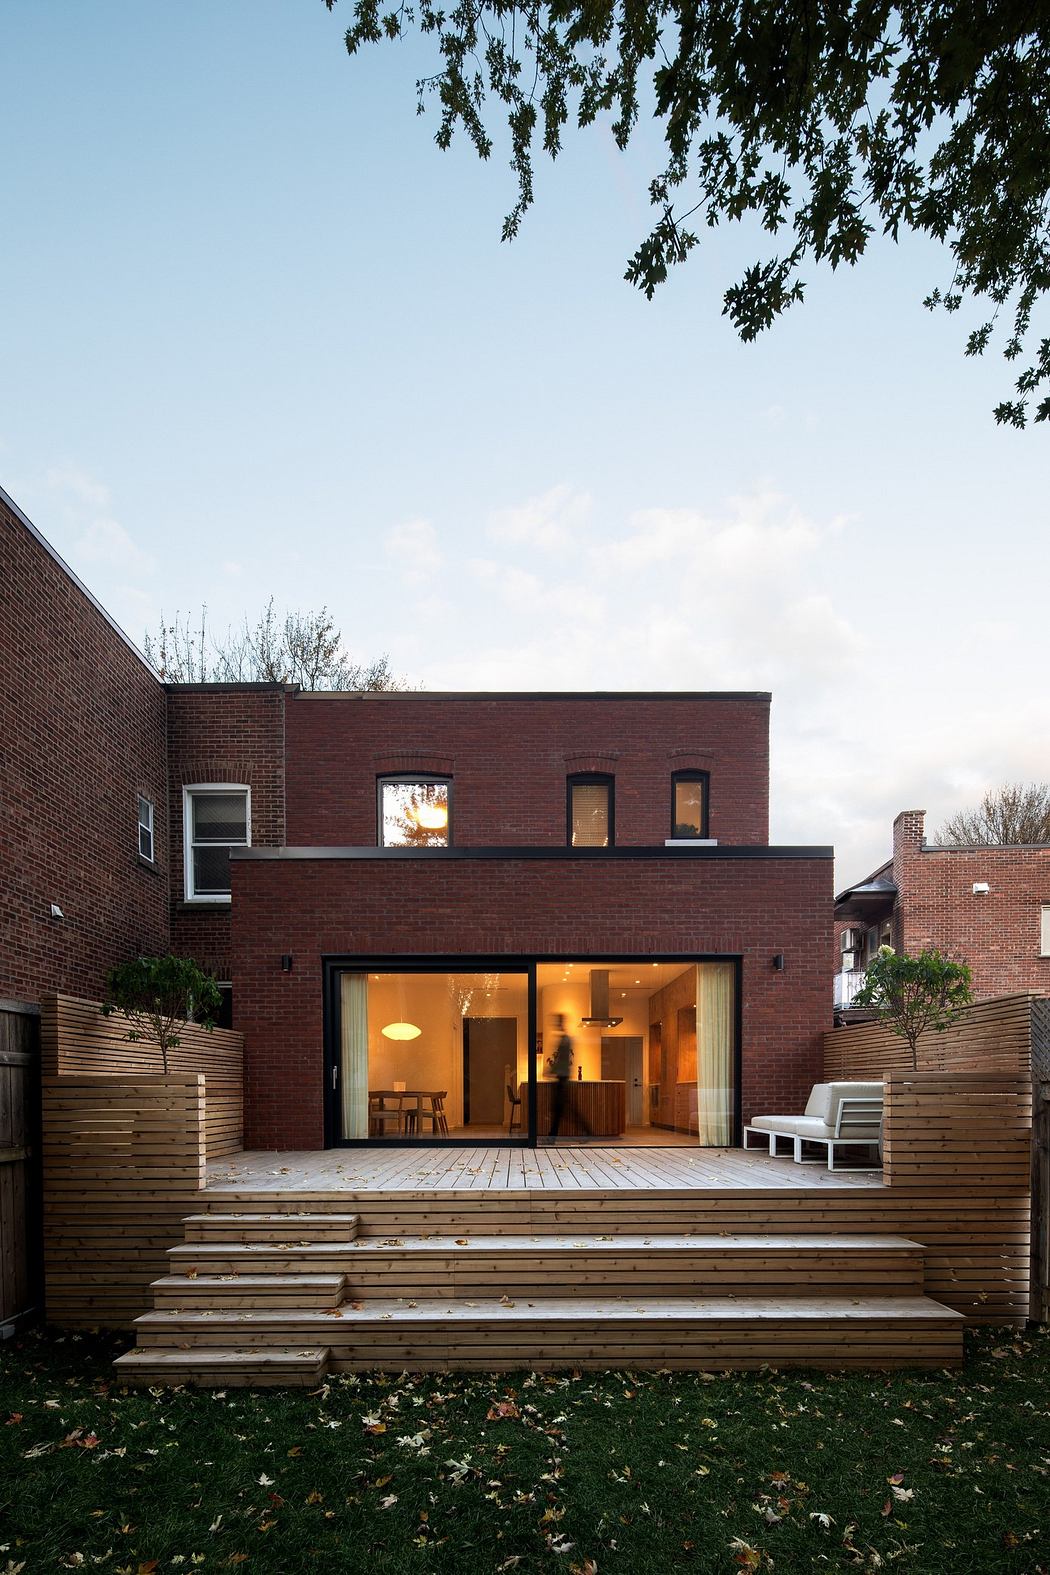 Contemporary brick house with large windows and wooden deck at dusk.